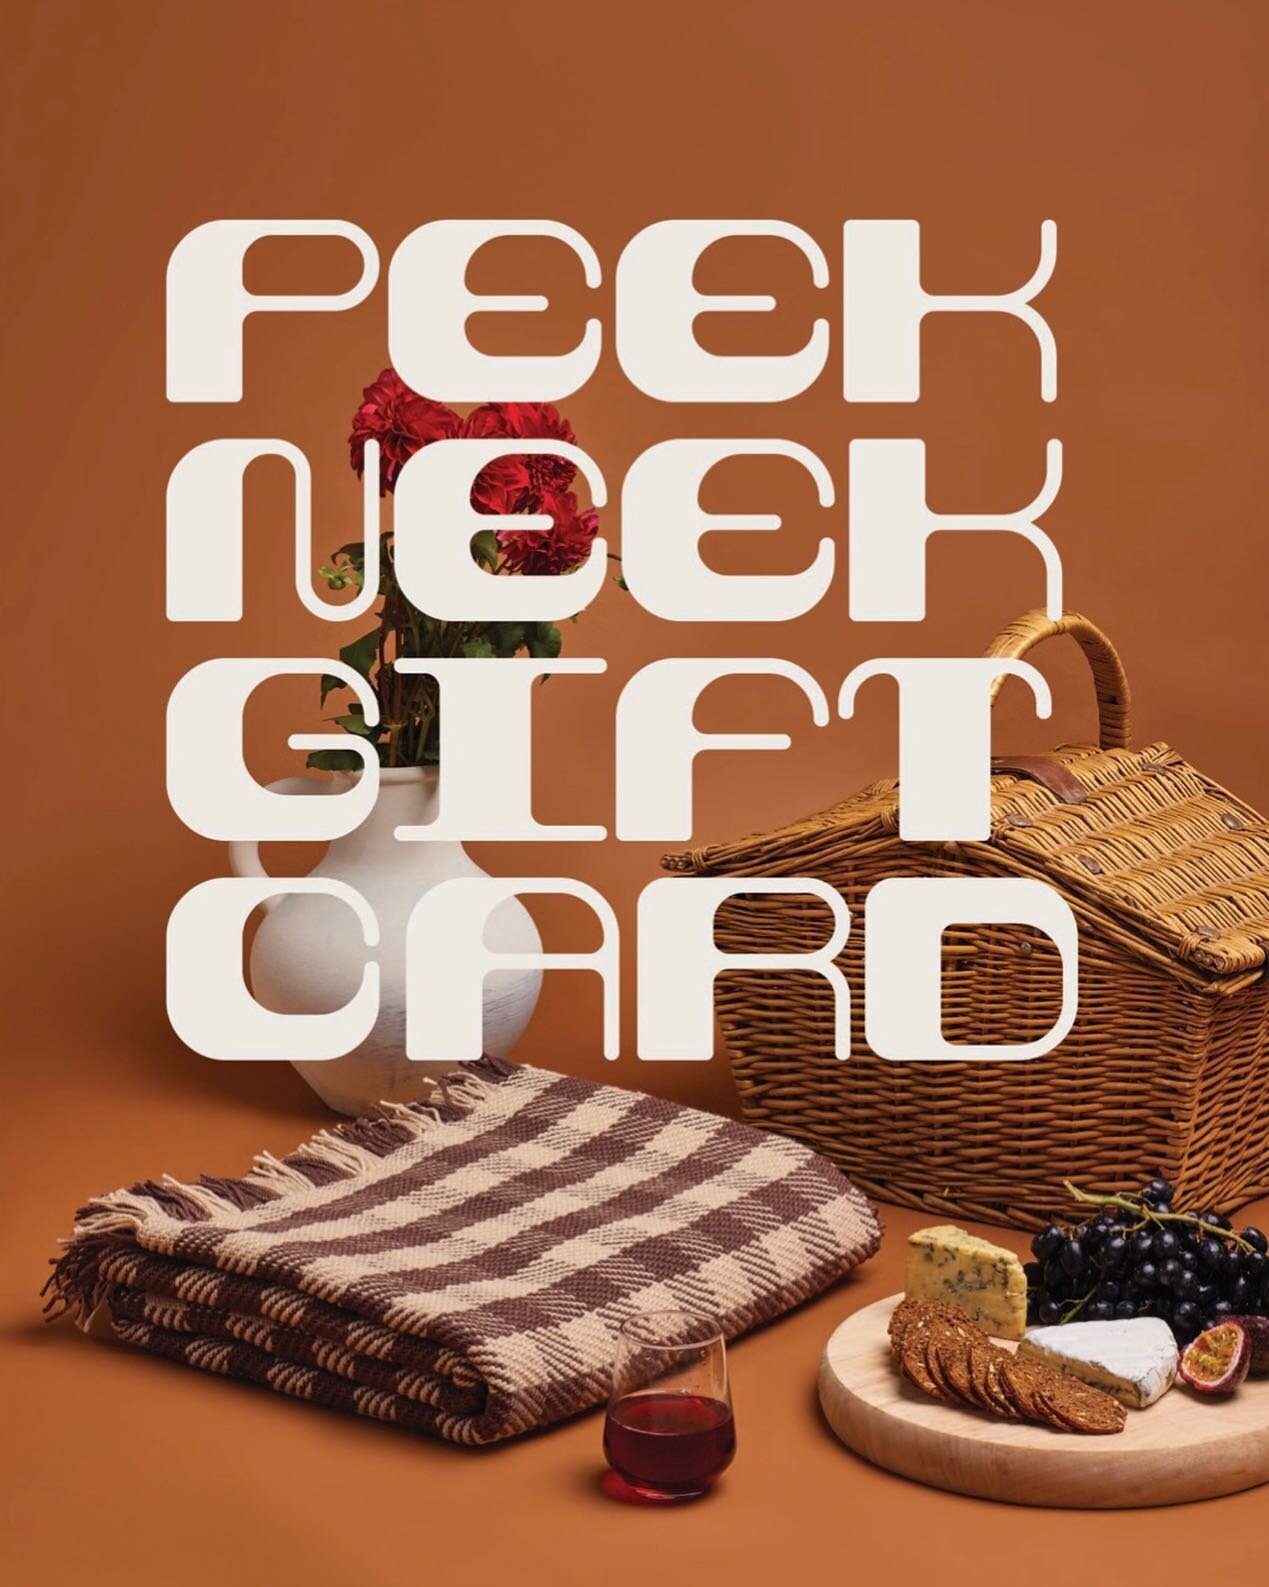 Gift cards are now available for the perfect can't-go-wrong gift 🤎🤍

For birthdays, weddings, congratulations or just a really good excuse to remind someone you love them - give the gift of quality time spent lounging for hours on the Thicky Rug 🧡